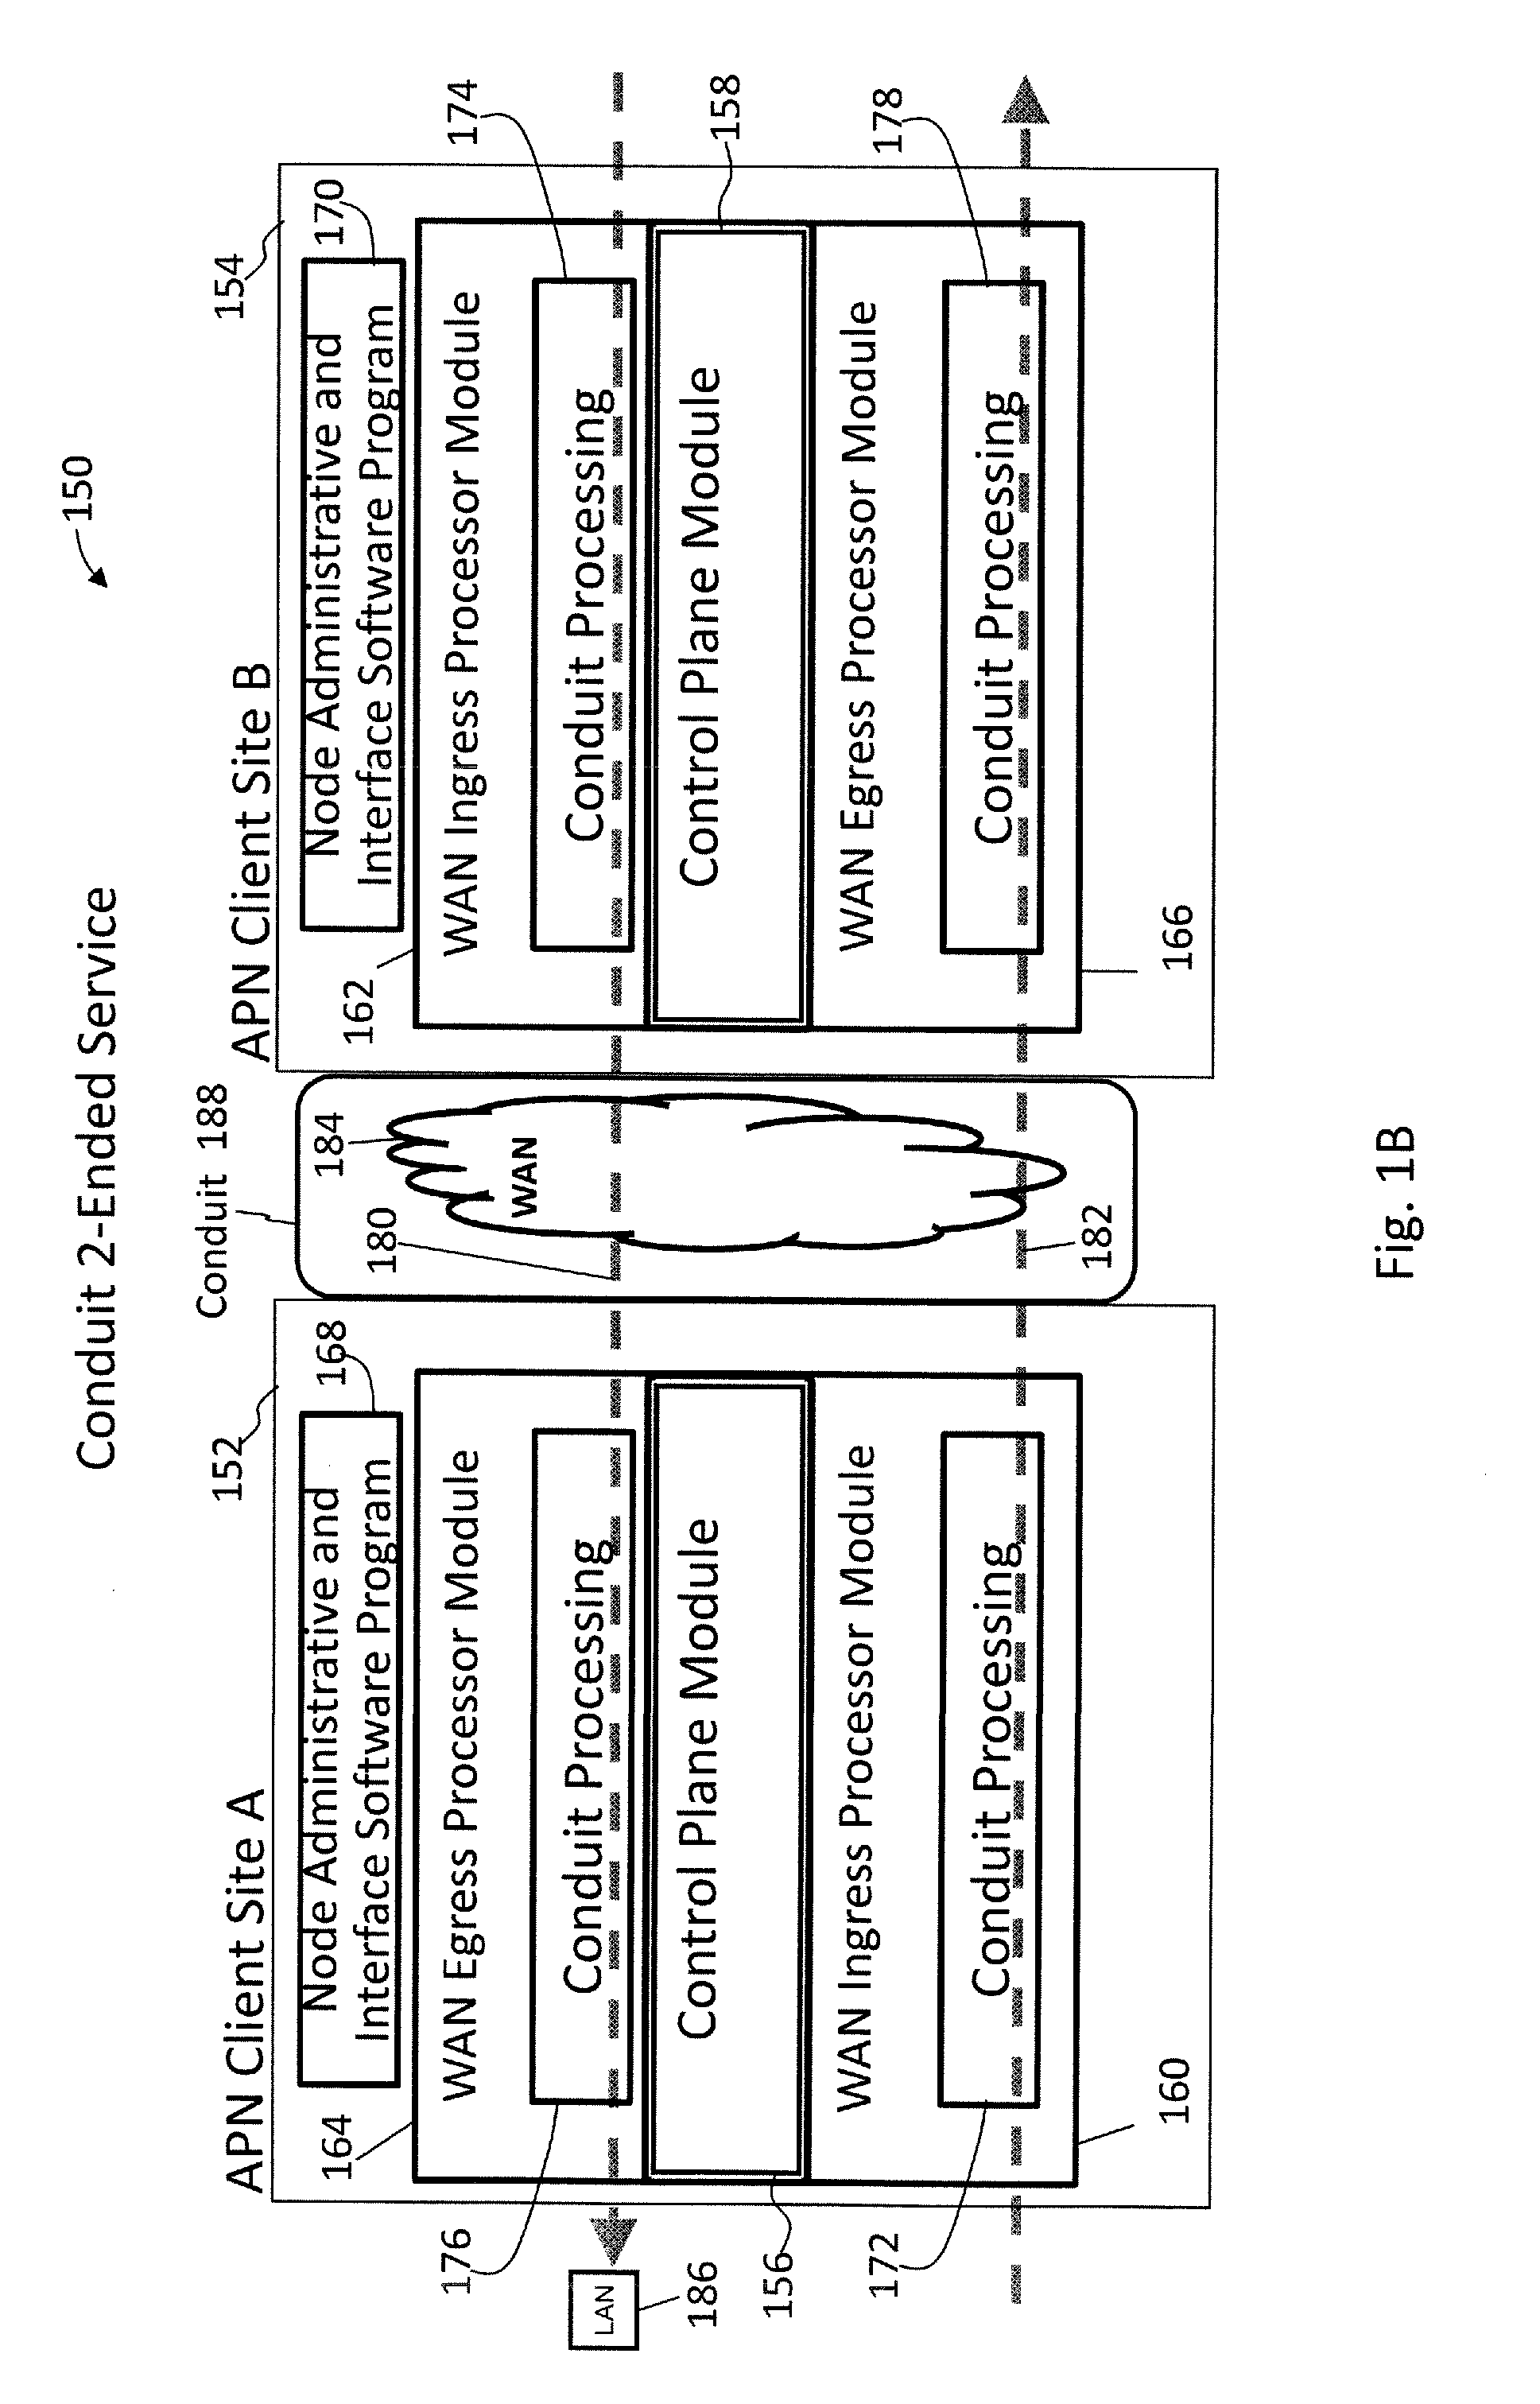 Methods and Apparatus for Providing Adaptive Private Network Centralized Management System Discovery Processes